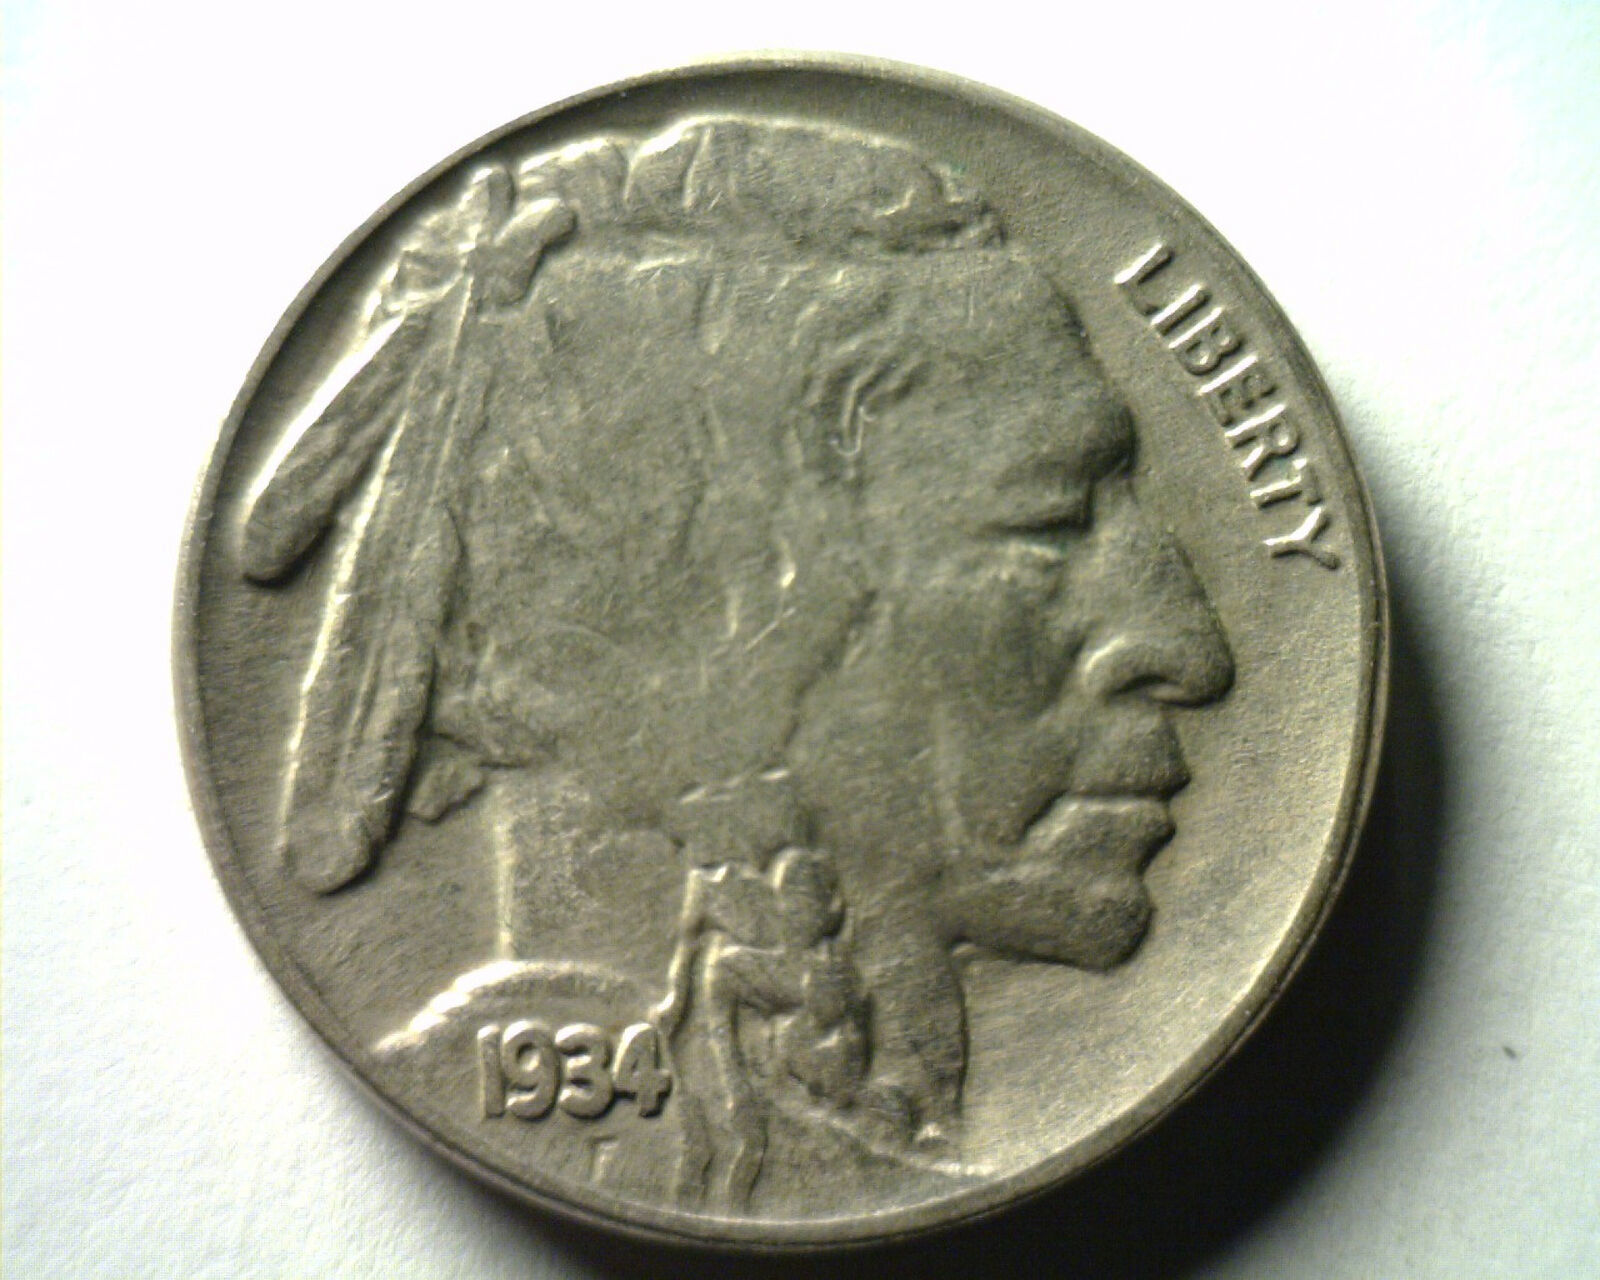 Primary image for 1934 BUFFALO NICKEL EXTRA FINE / ABOUT UNCIRCULATED XF/AU NICE ORIGINAL EF/AU